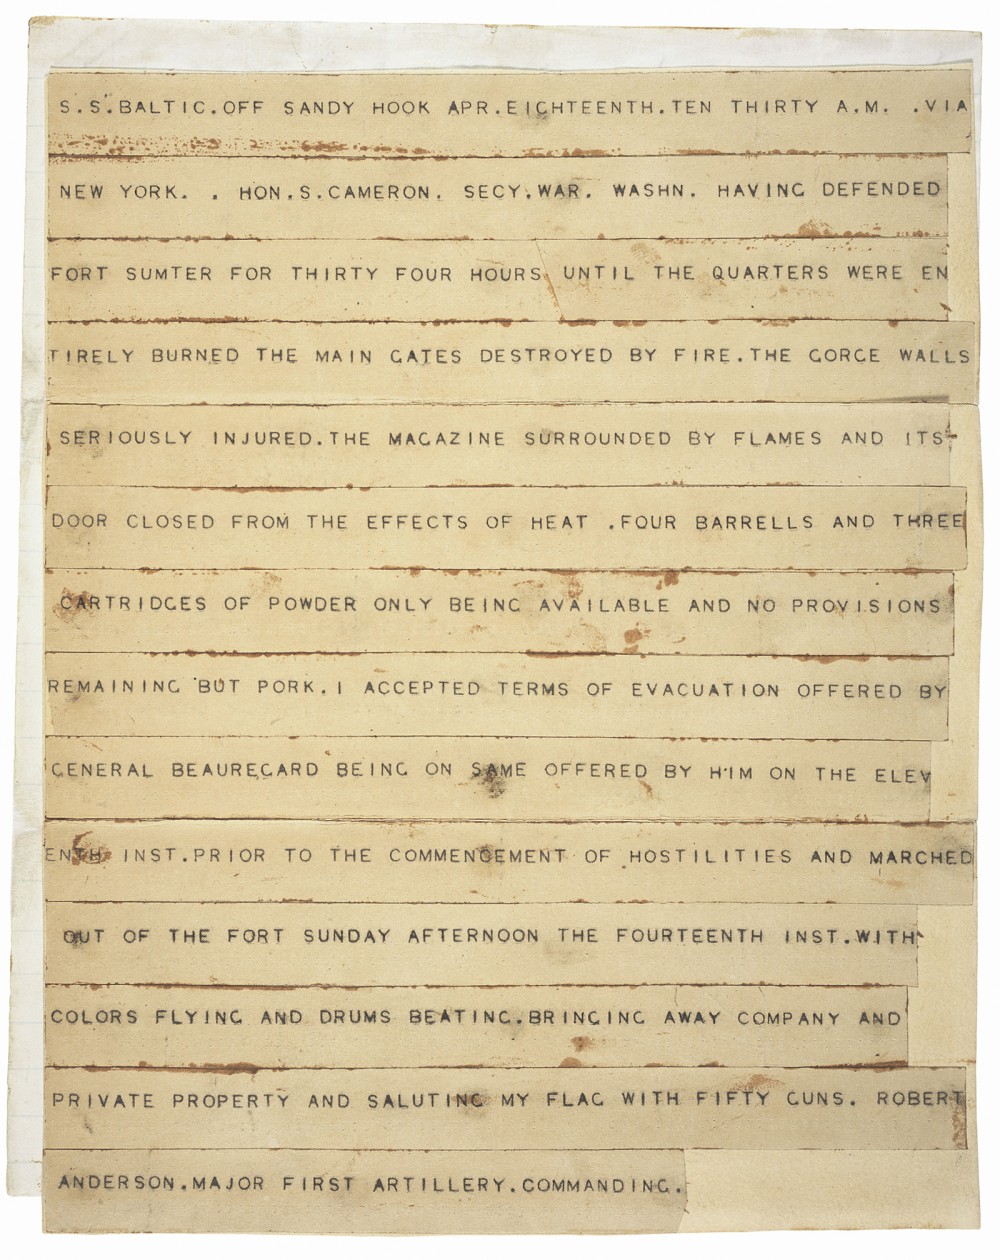 Telegram announcing withdrawal from Fort Sumter